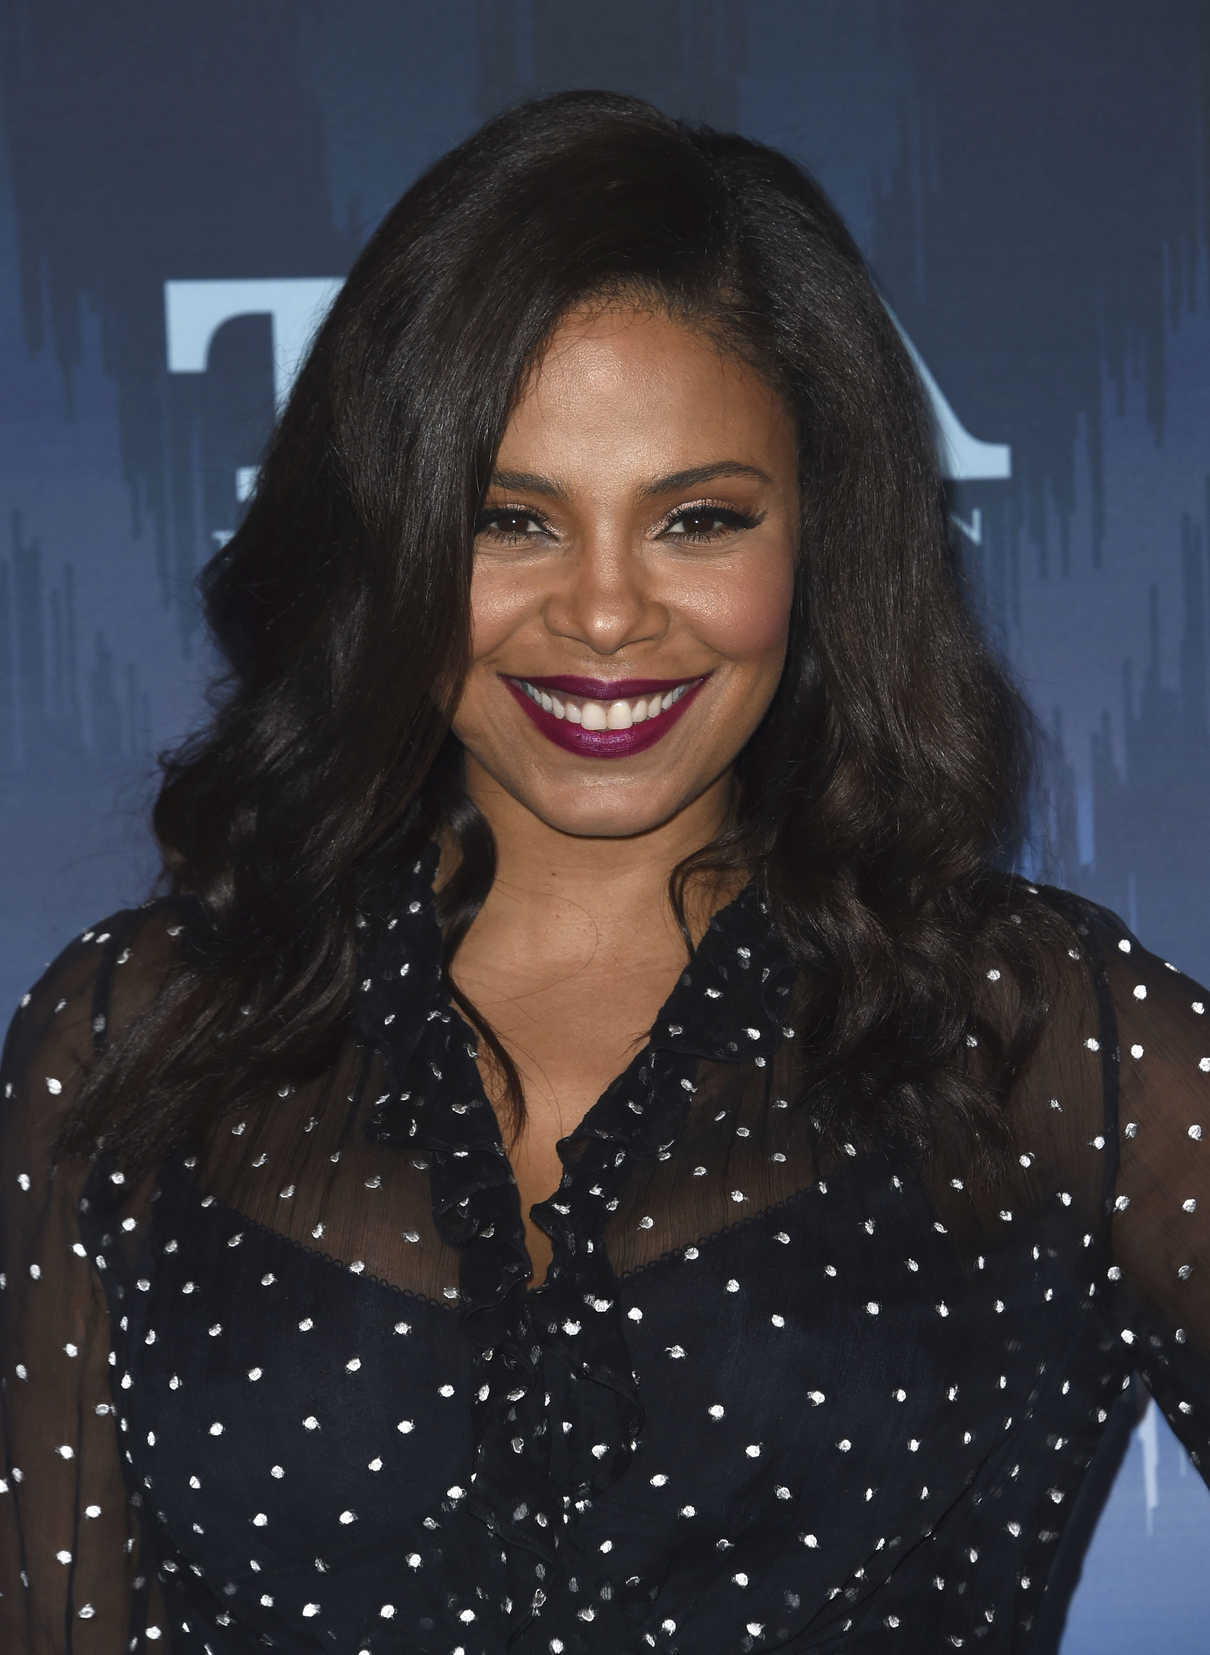 Sanaa Lathan at the FOX All-Star Party During the 2017 Winter TCA Tour in Pasadena 01/11/2017-4